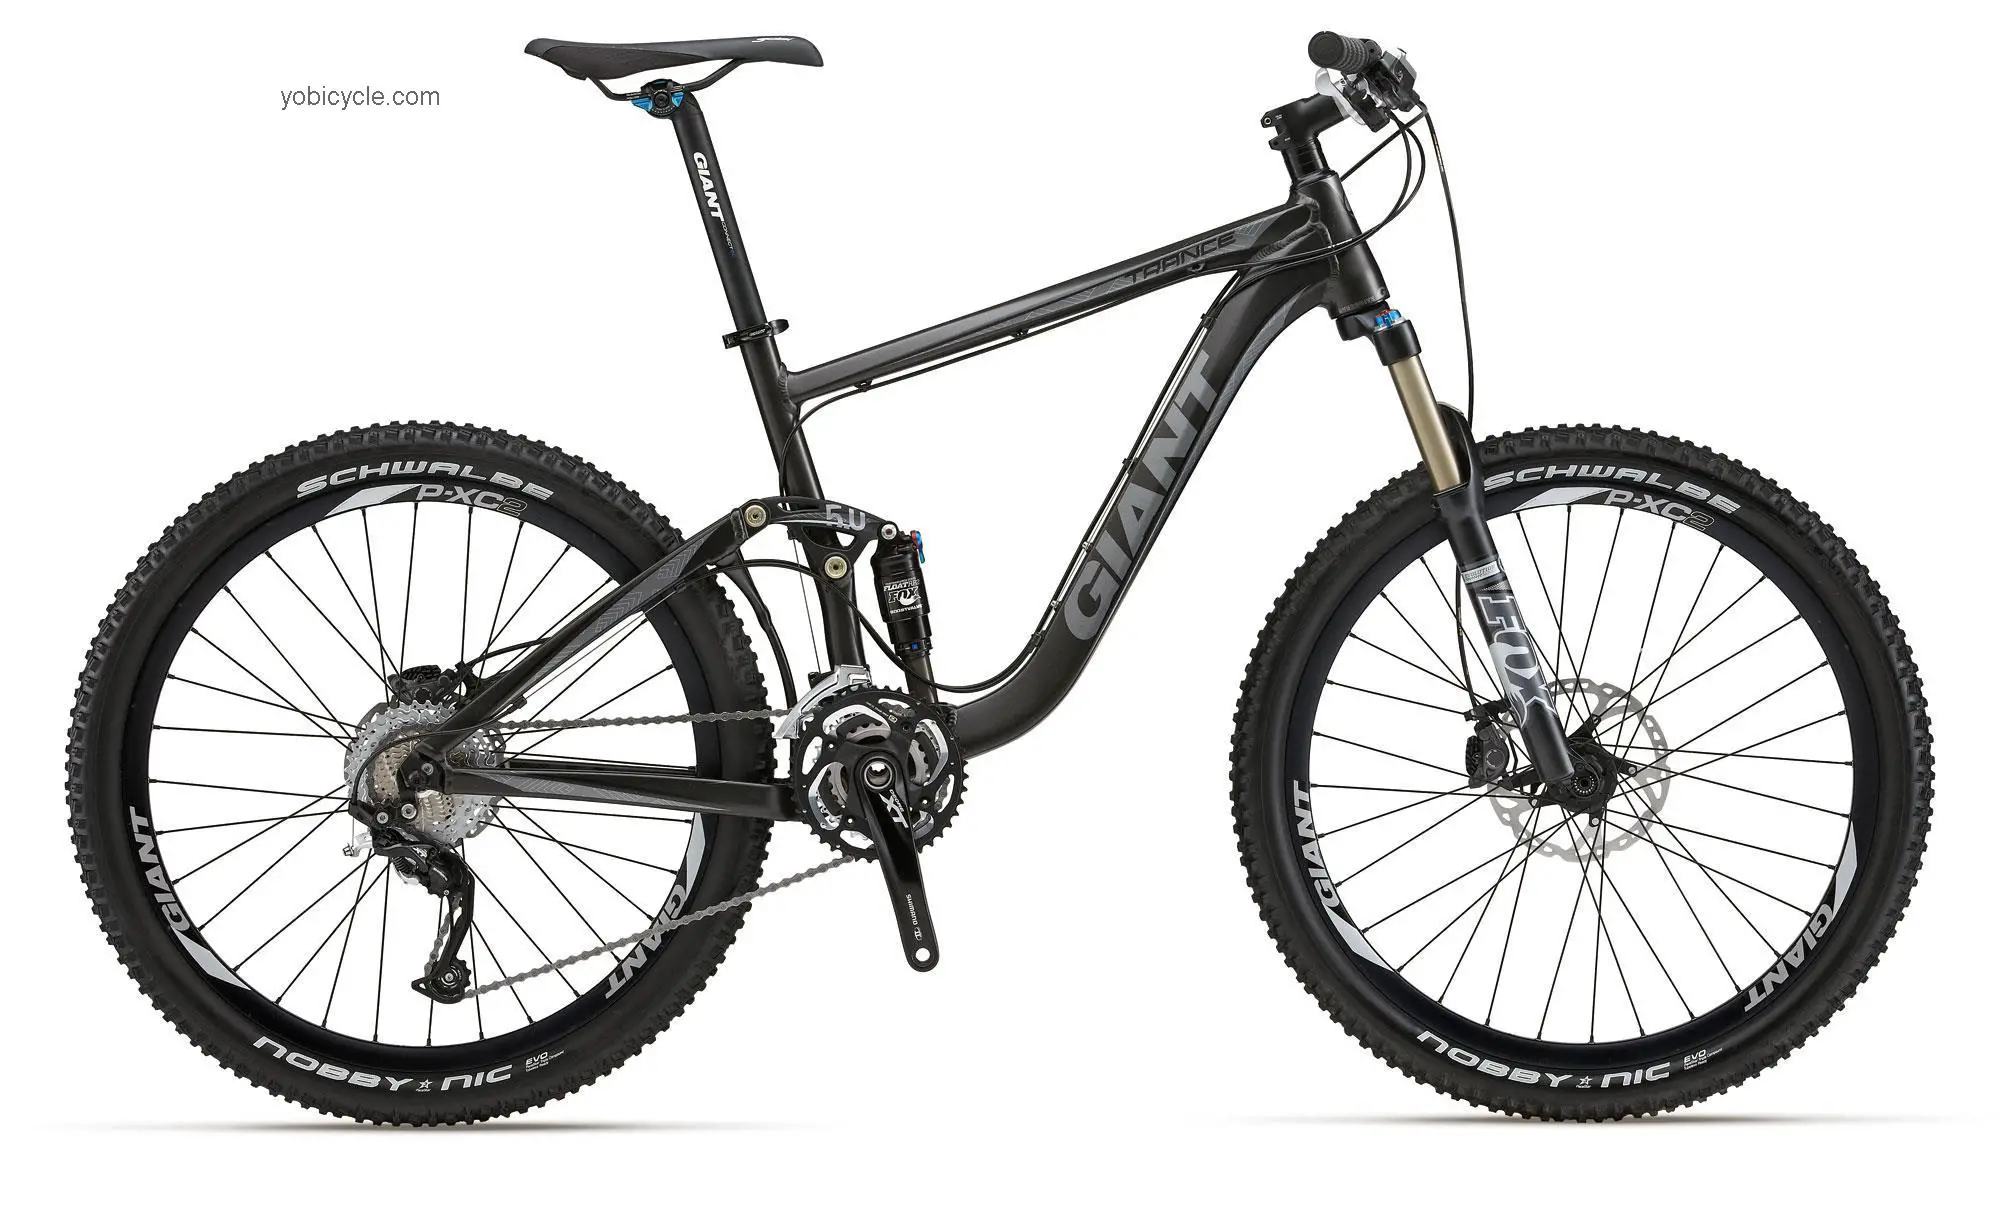 Giant Trance X 1 2012 comparison online with competitors